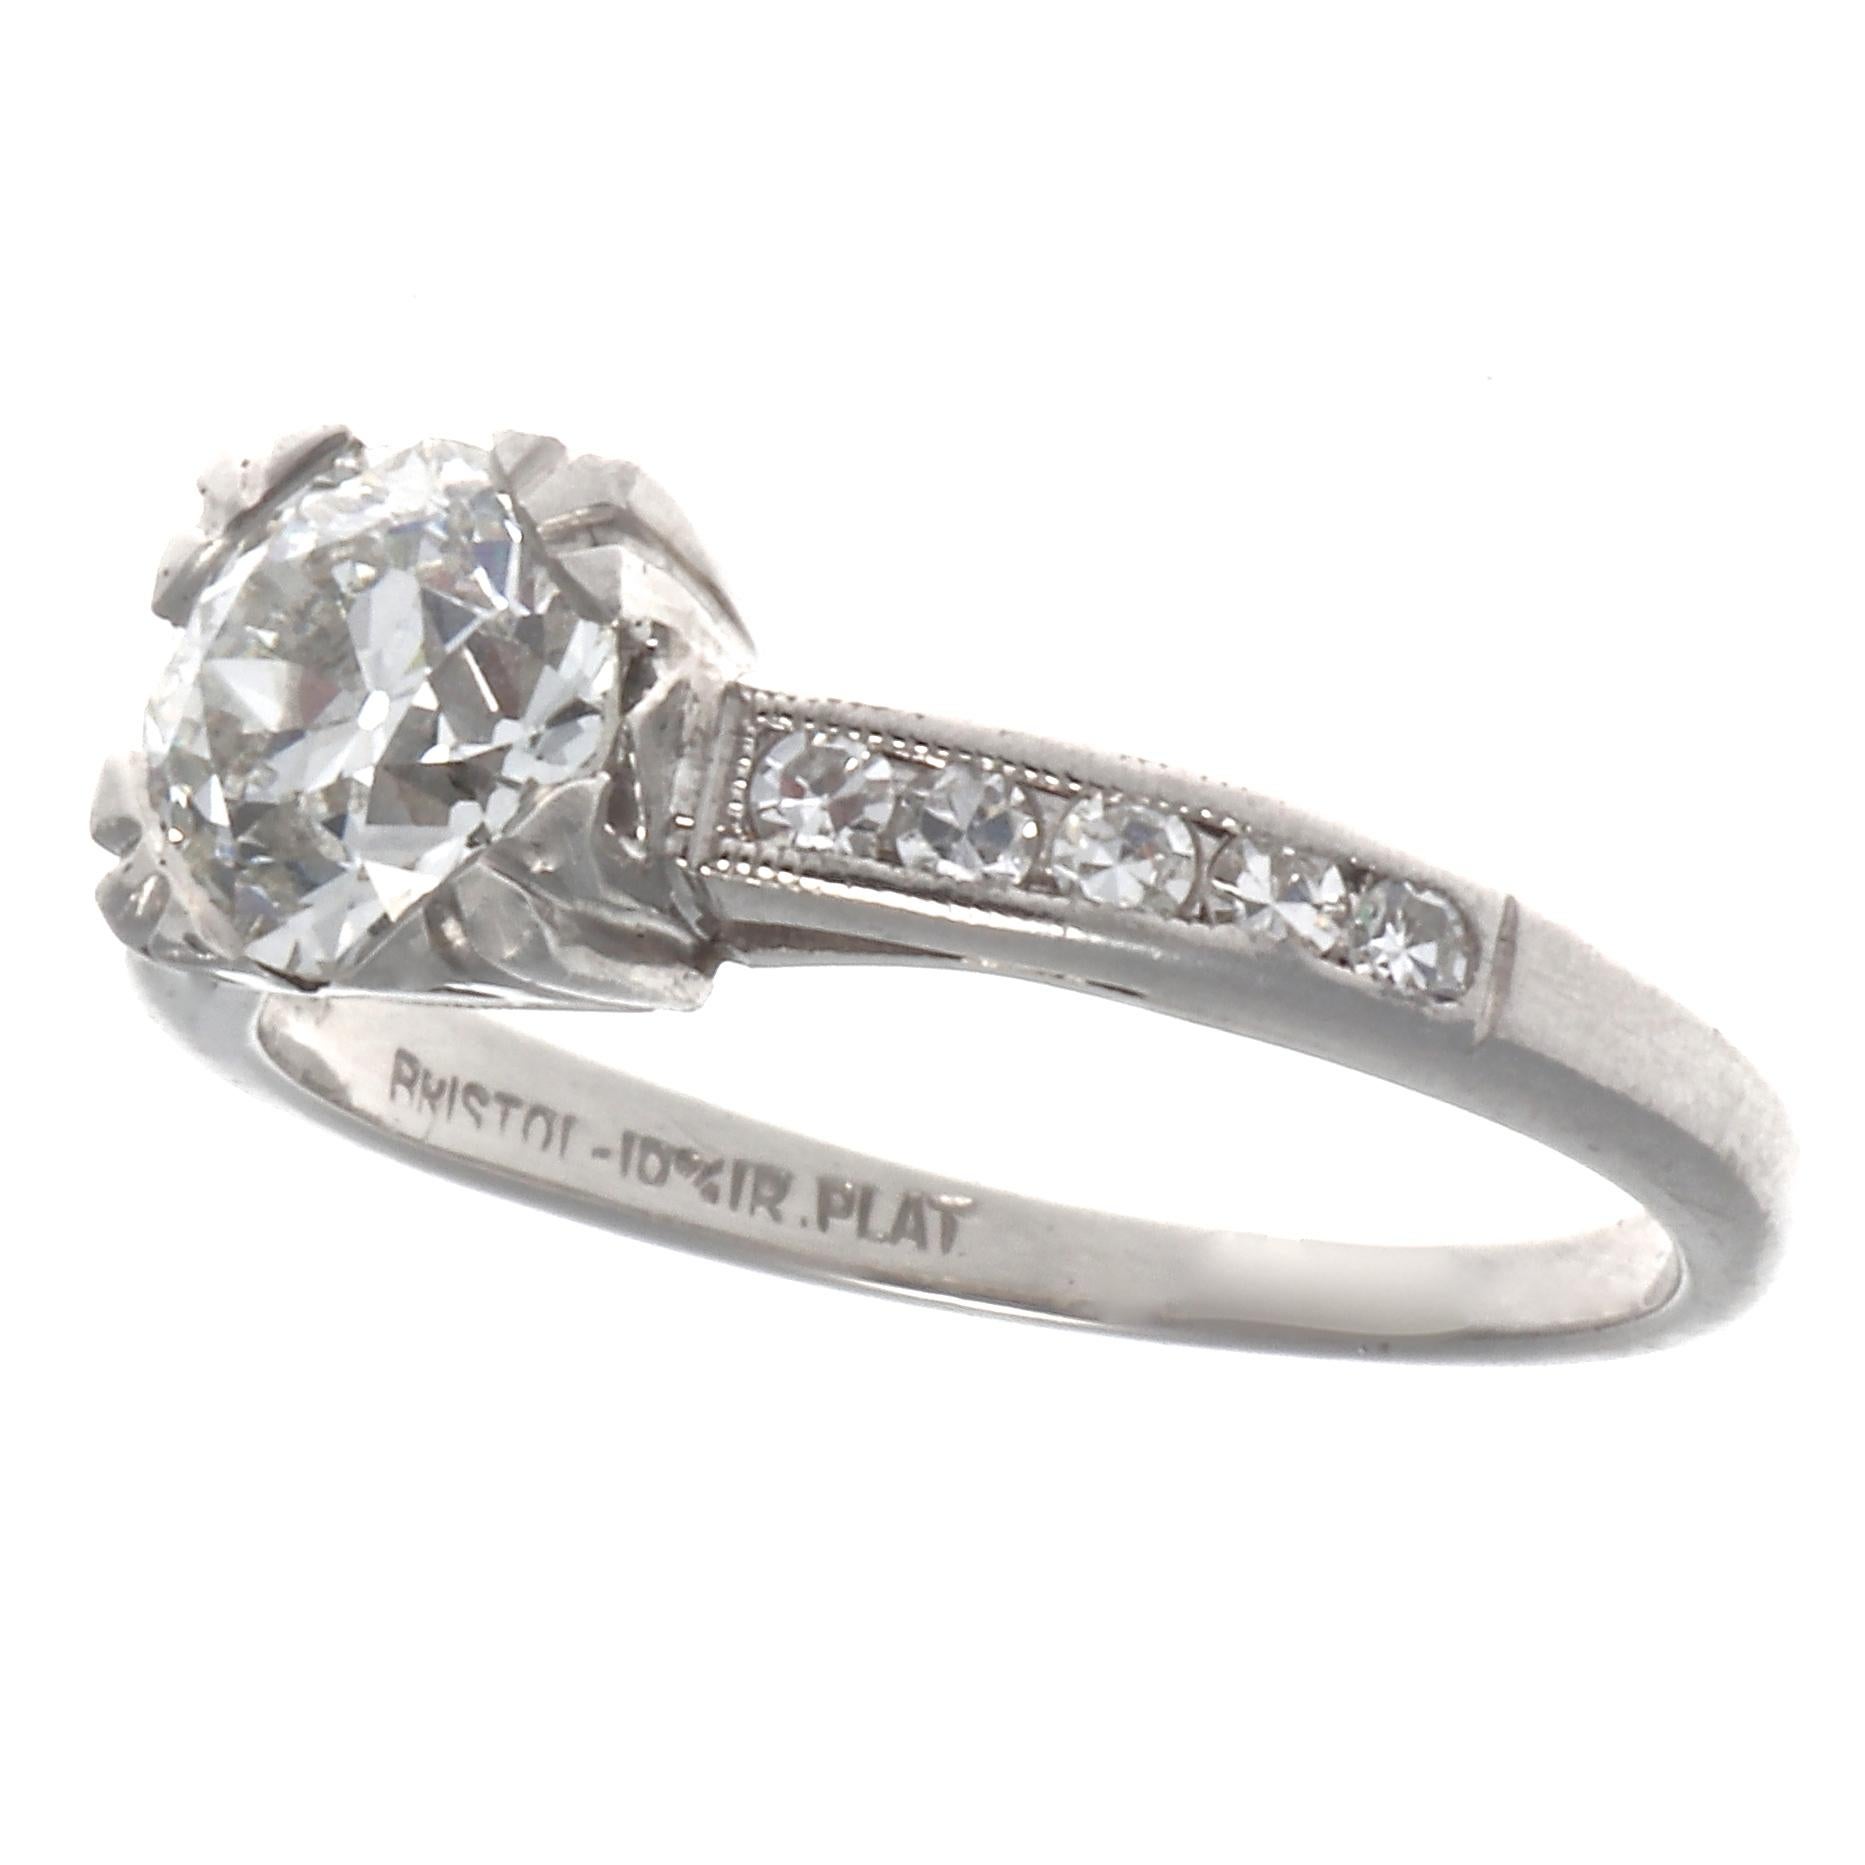 Authentic Art Deco diamond platinum ring. Featuring a GIA 0.78 carat old European cut diamond, graded I color, VS1 clarity. With 10 single cut diamonds that weigh approximately 0.25 carats, graded F-G color, VS clarity. Circa 1920s. Size 4 3/4 and